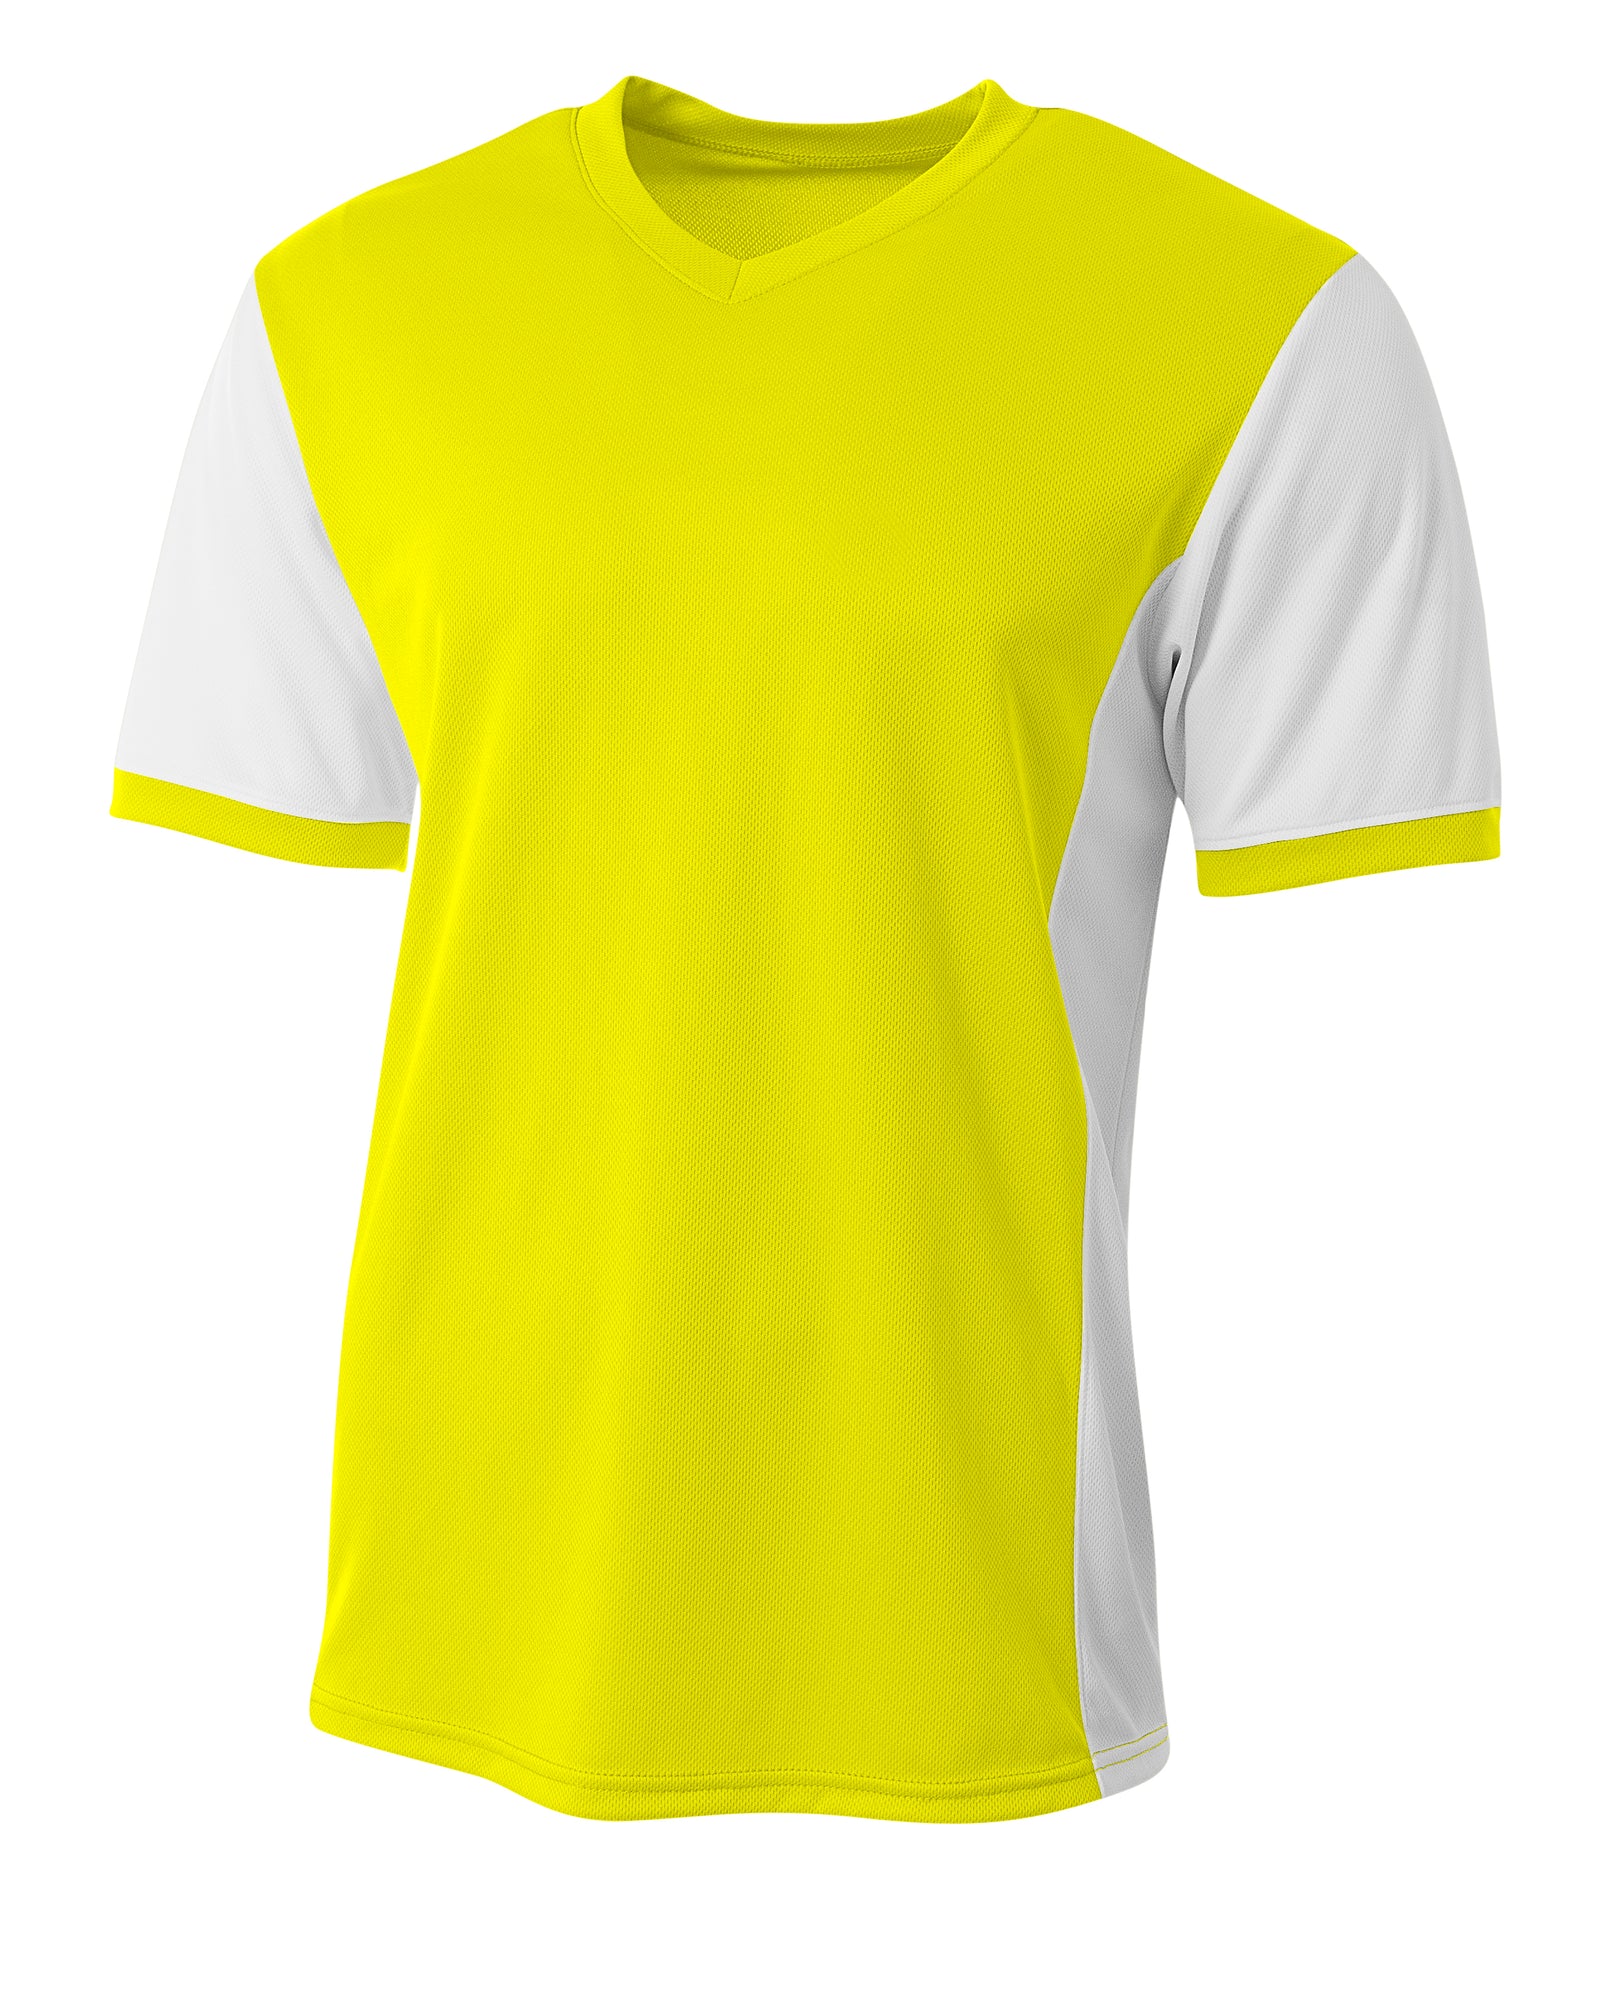 Safety Yellow White A4 A4 Premier Soccer Jersey